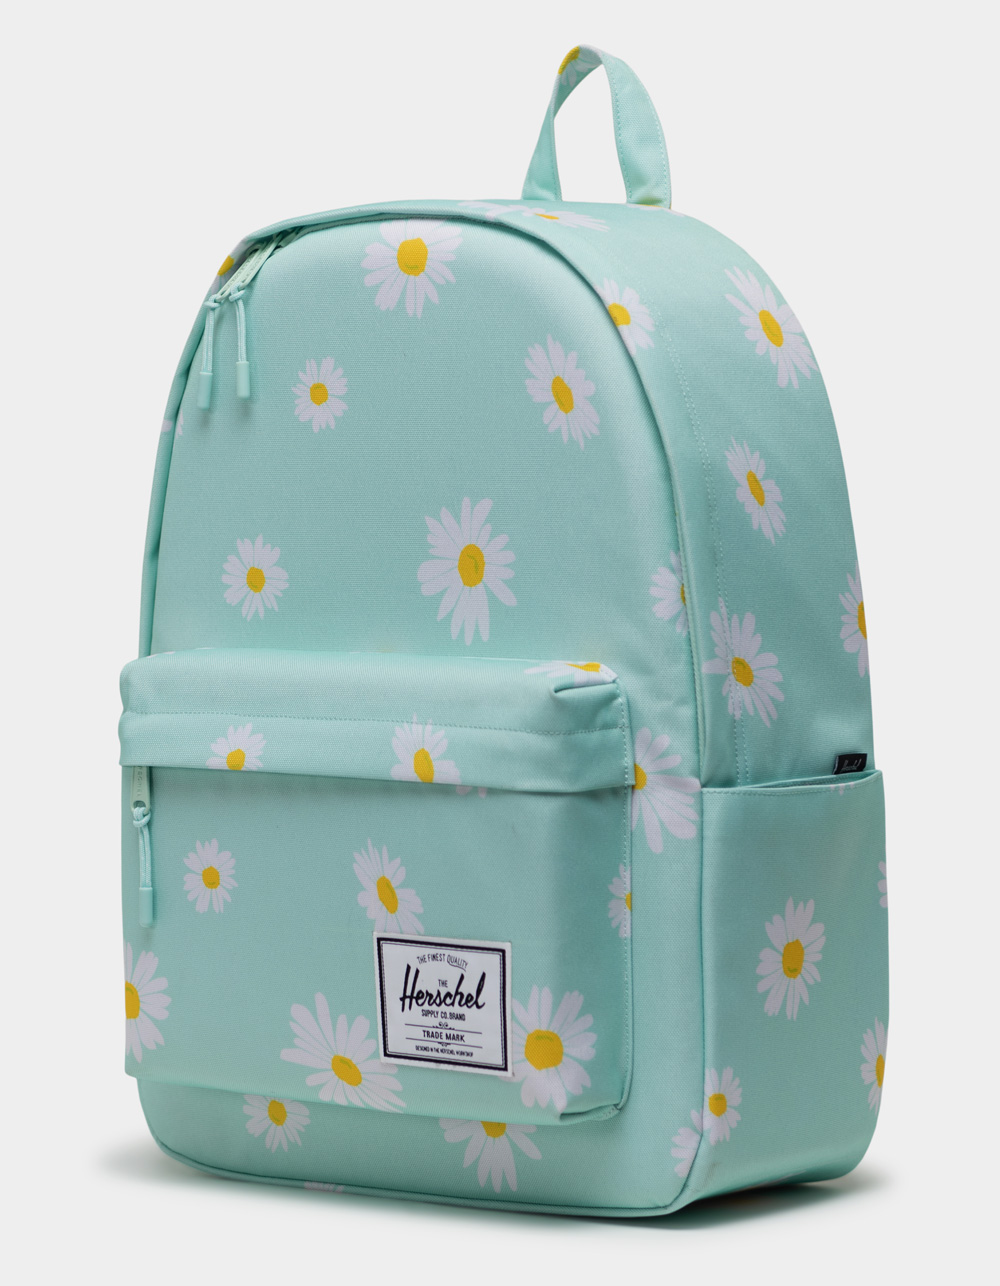 Herschel Supply Co. Classic Backpack | Urban Outfitters Japan - Clothing,  Music, Home & Accessories